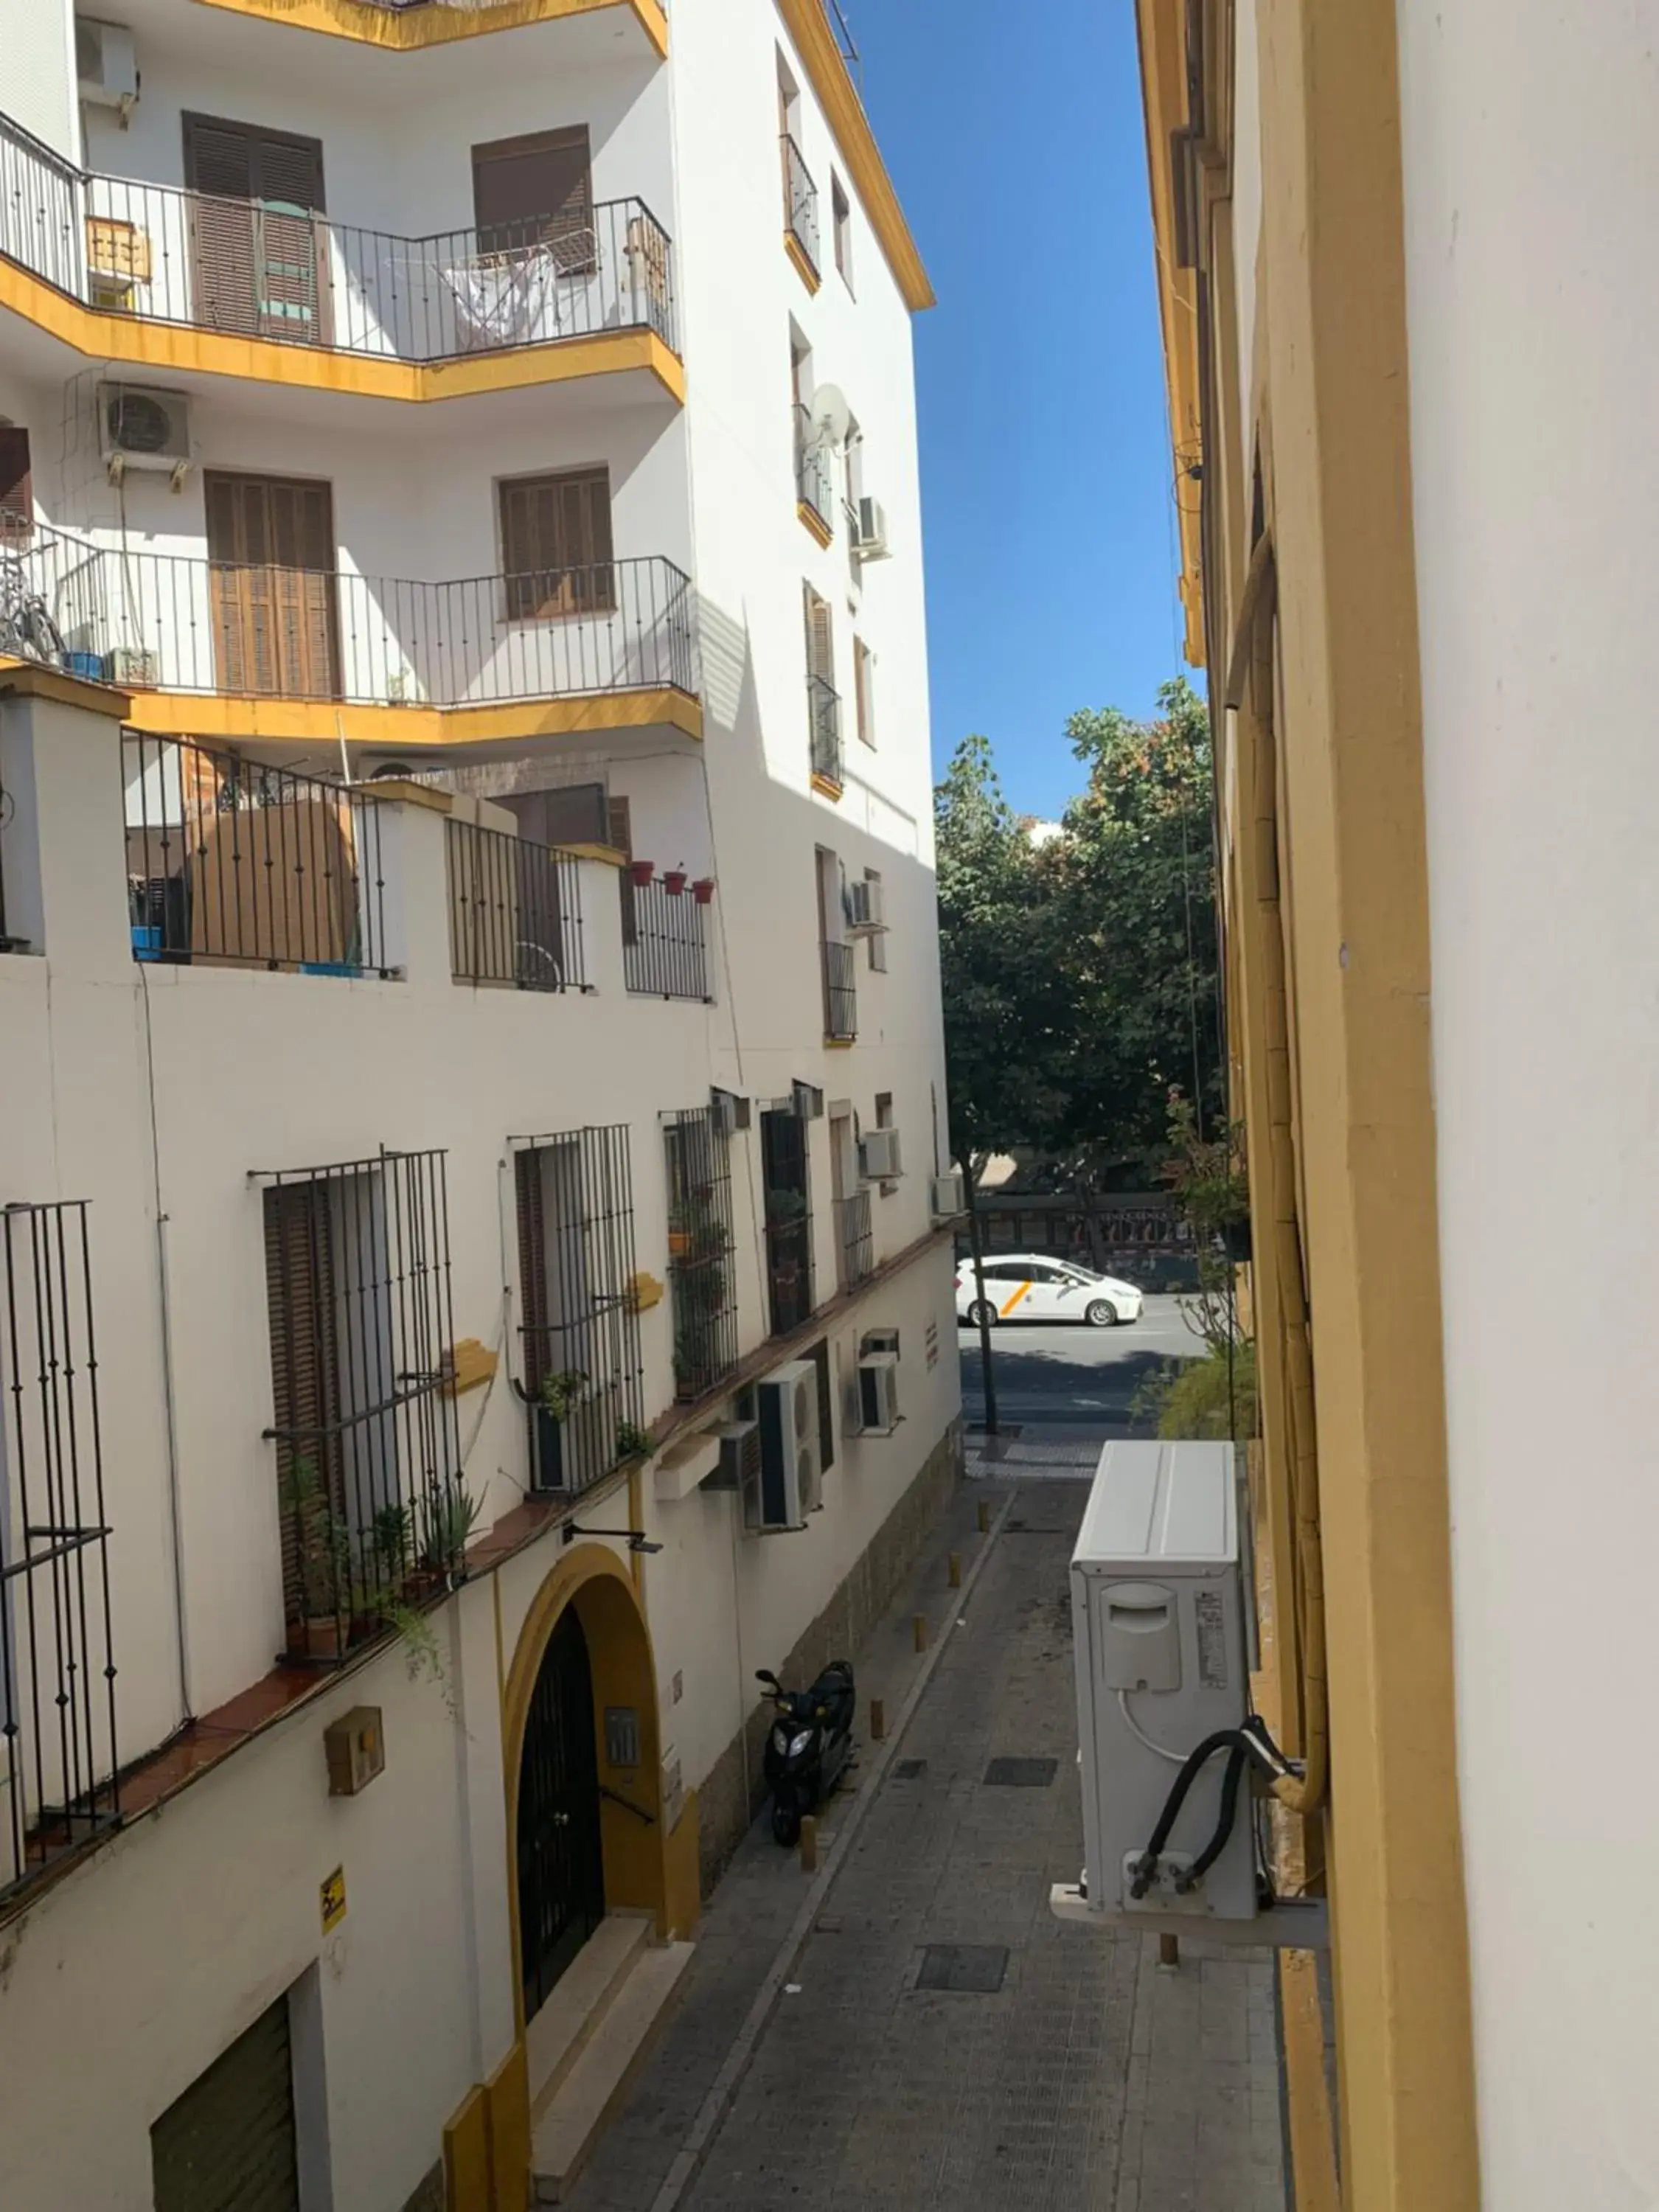 City view in Hostal Alcobia